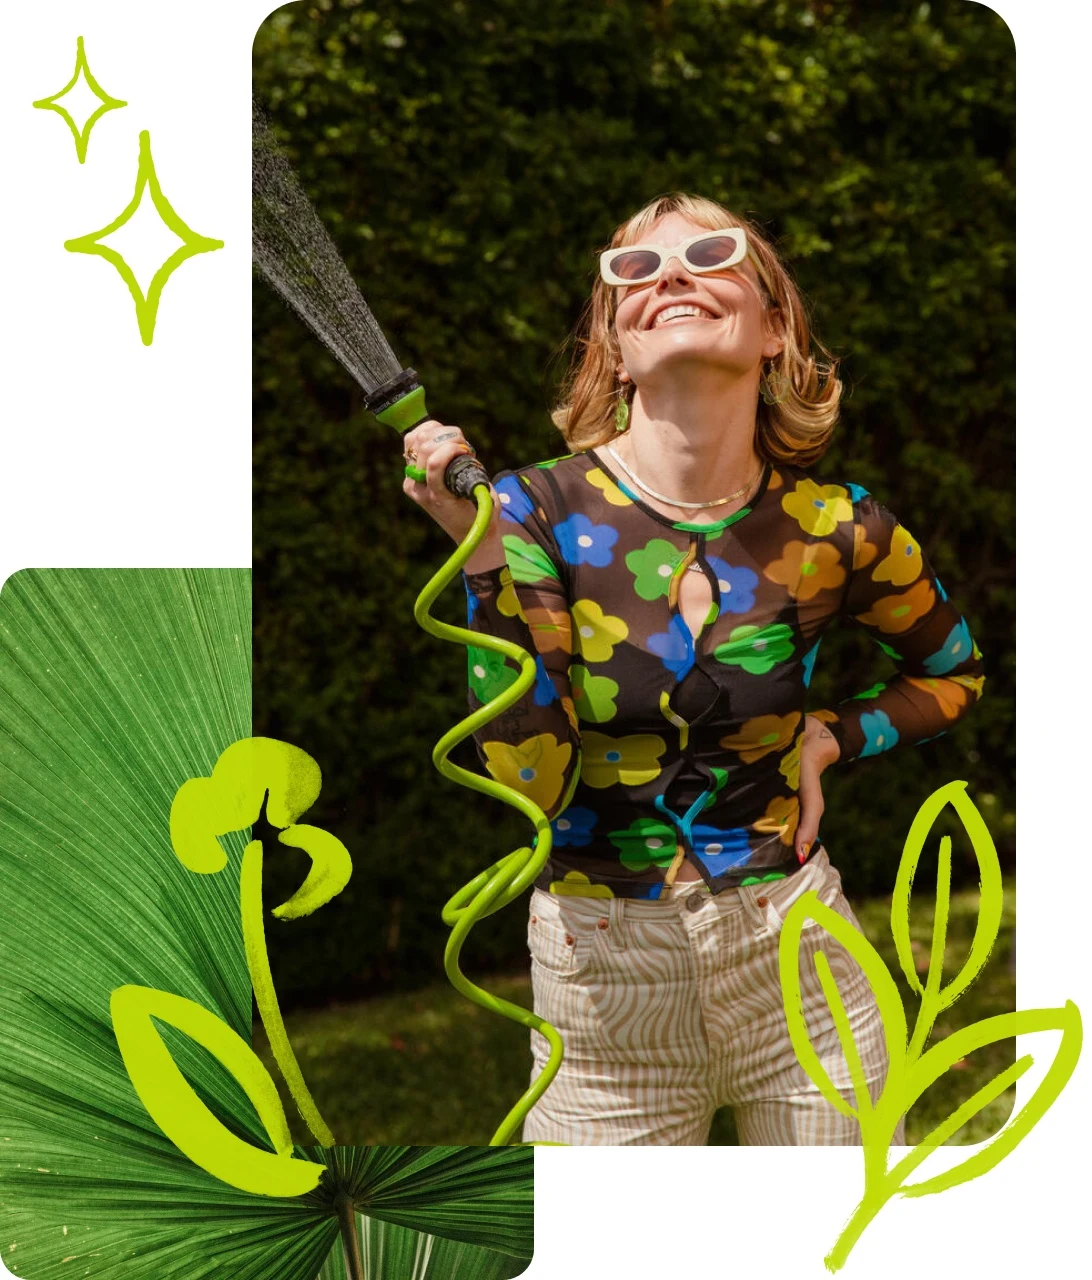 Pin collage of a smiling woman wearing sunglasses and a colourful shirt holding a garden hose